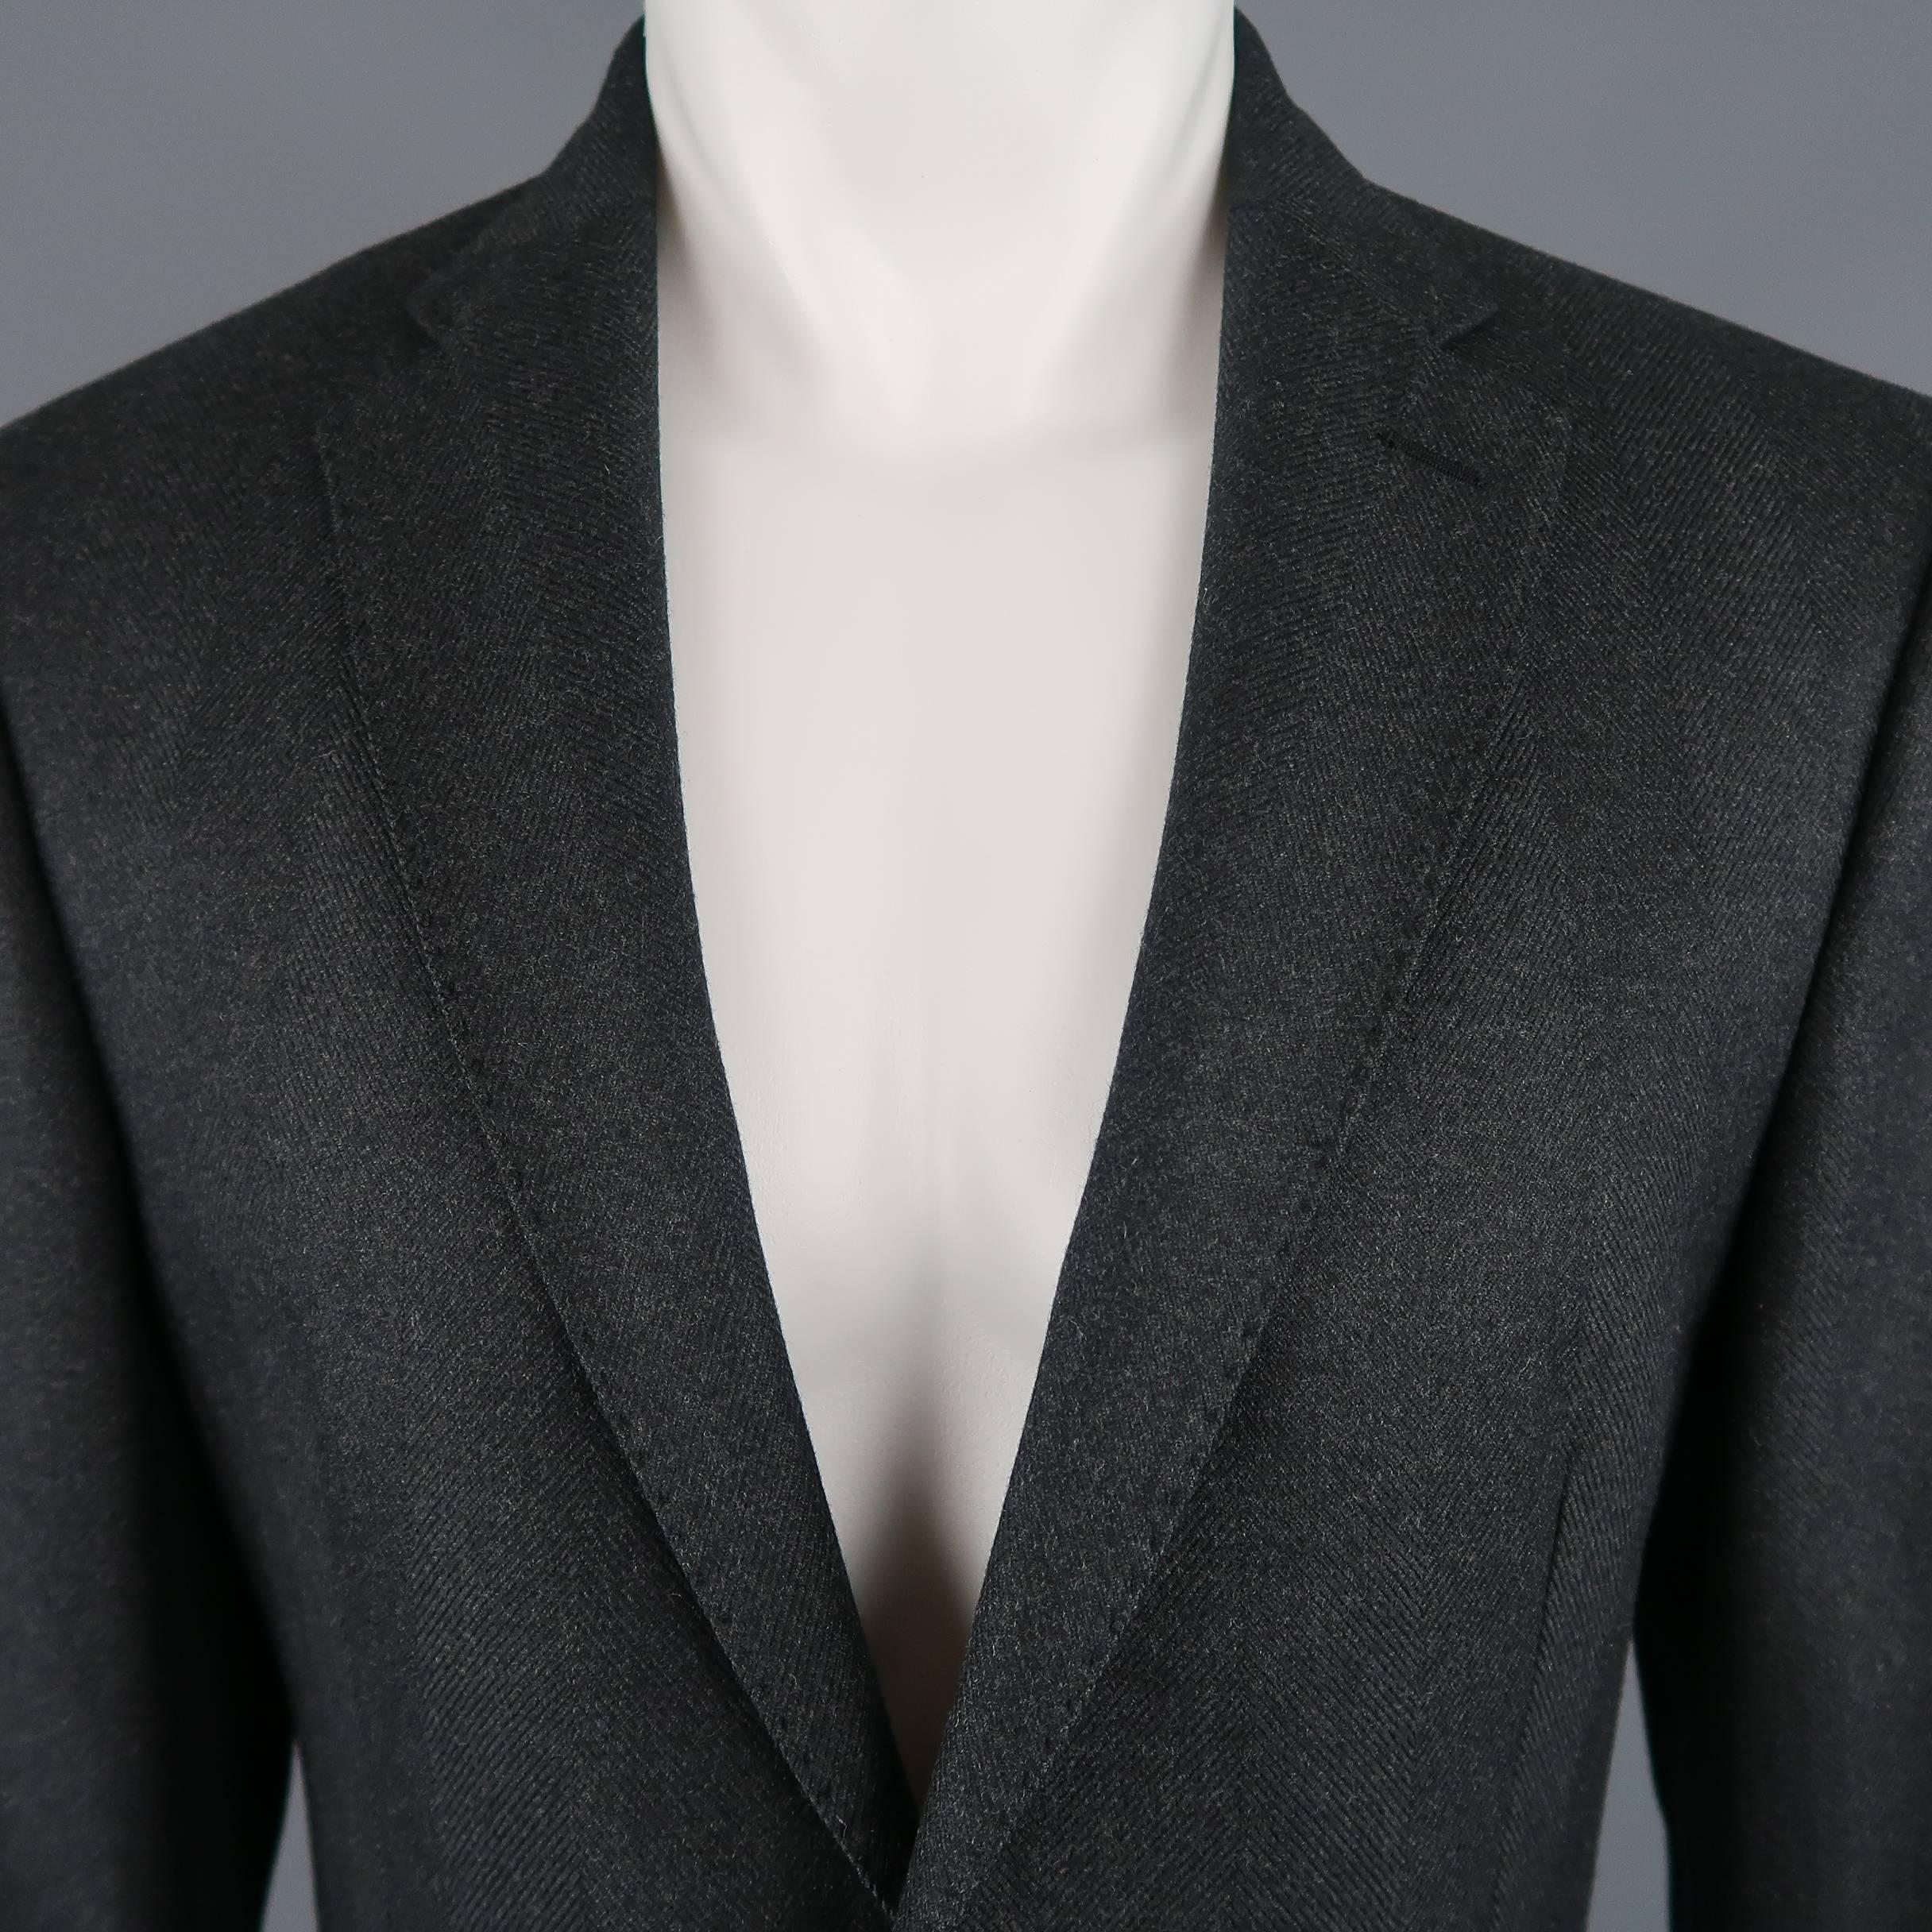 Raf Simons sport coat comes in heavy charcoal herringbone textured wool with a top stitch notch lapel, two button front, functional button cuff, and flap details. Made in Italy.
 
Excellent Pre-Owned Condition.
Marked: IT 50
 
Measurements:
